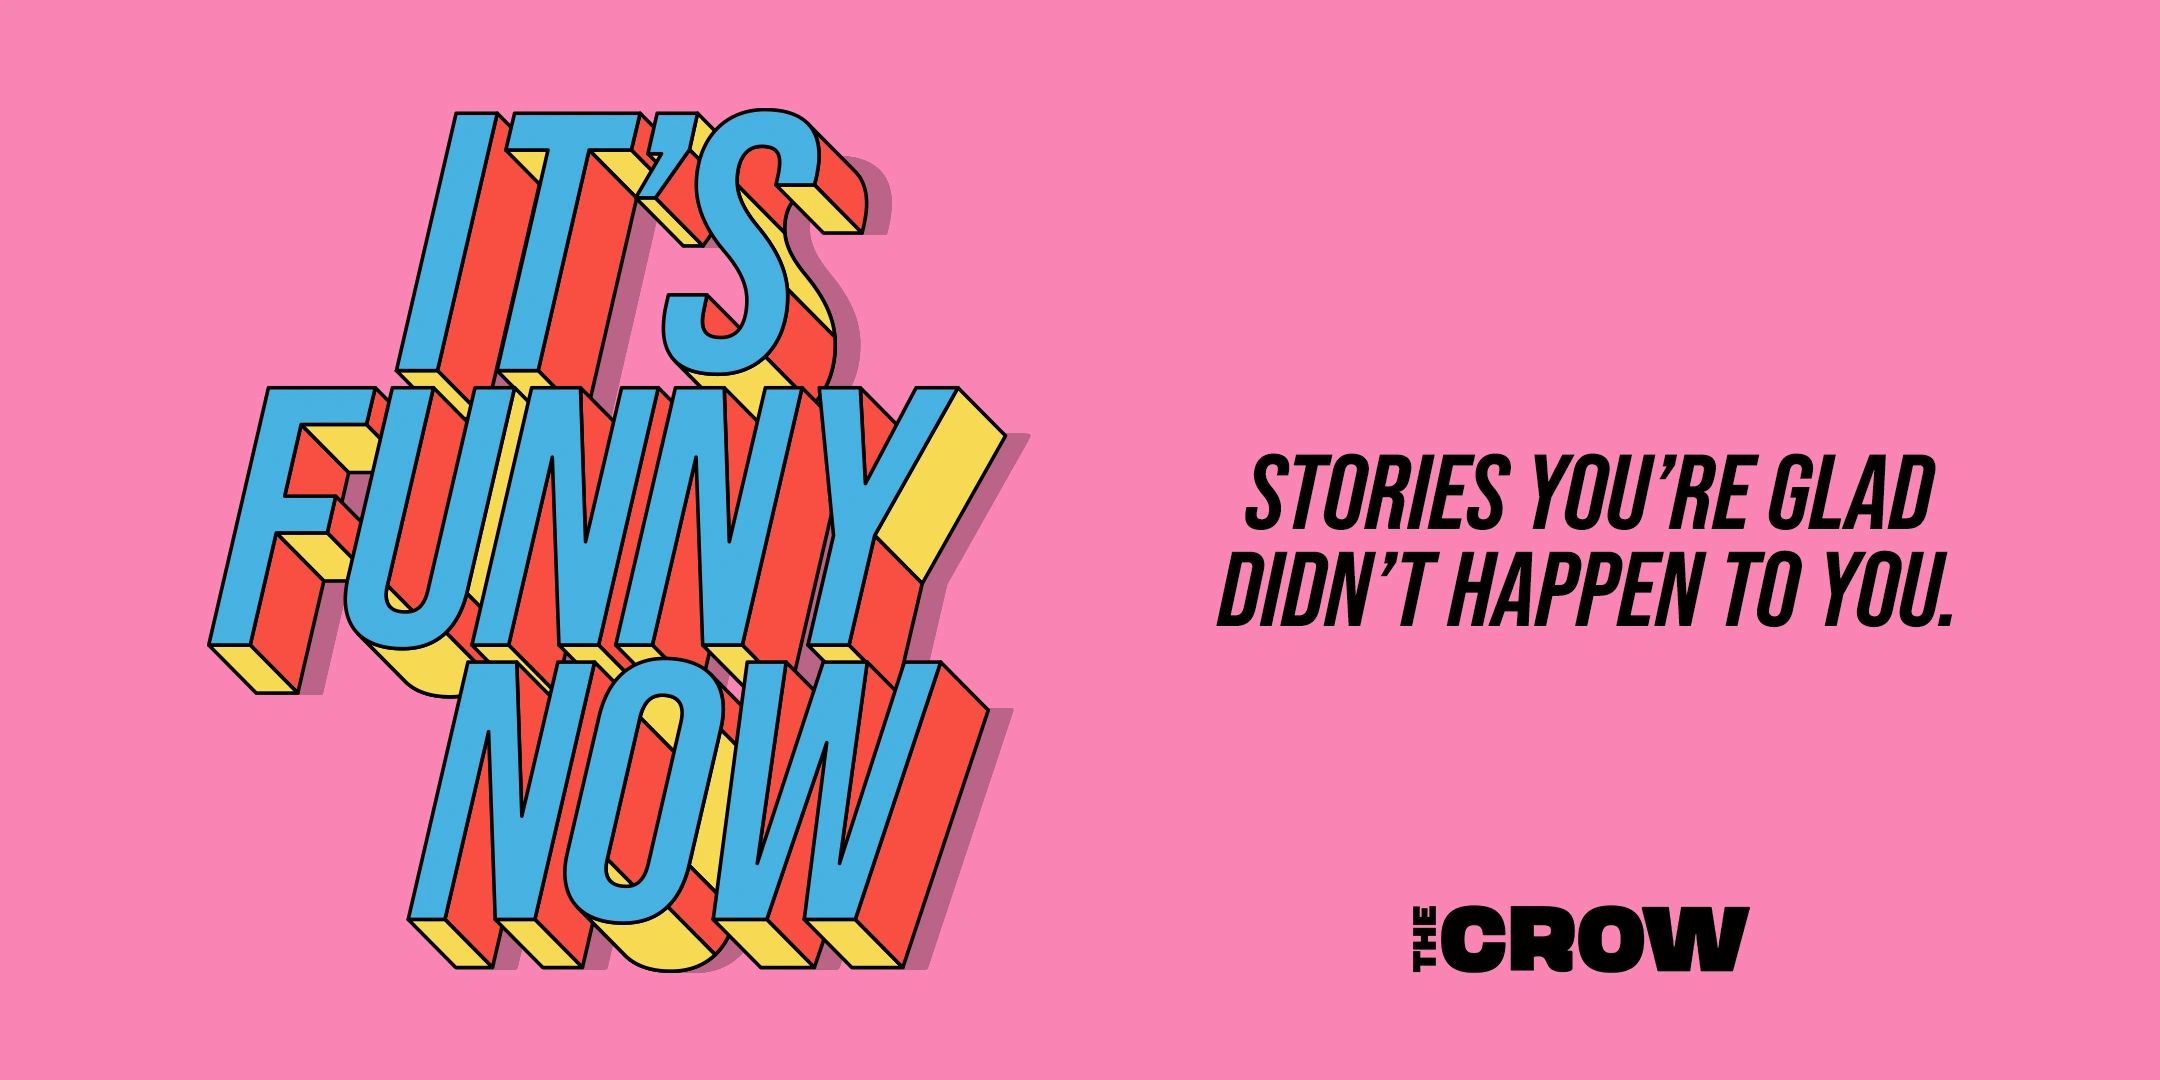 It's Funny Now Storytelling Show. Stories you're glad didn't happen to you.